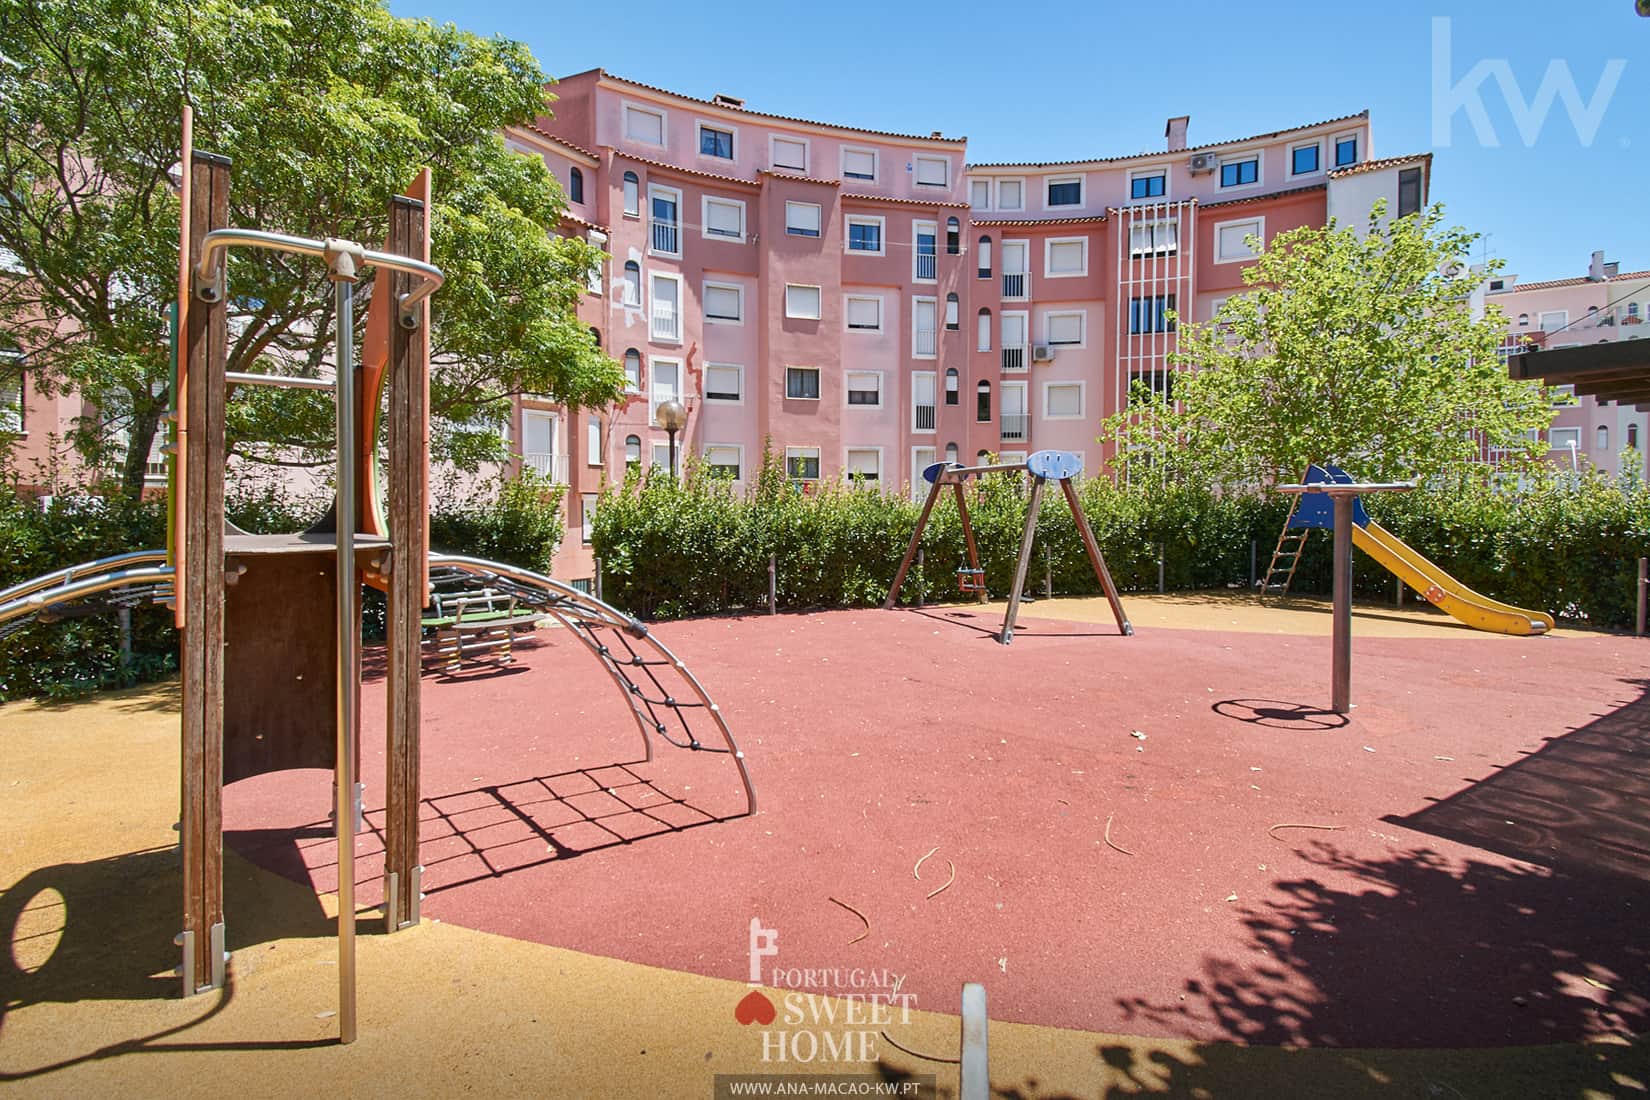 Playground at the rear of the building